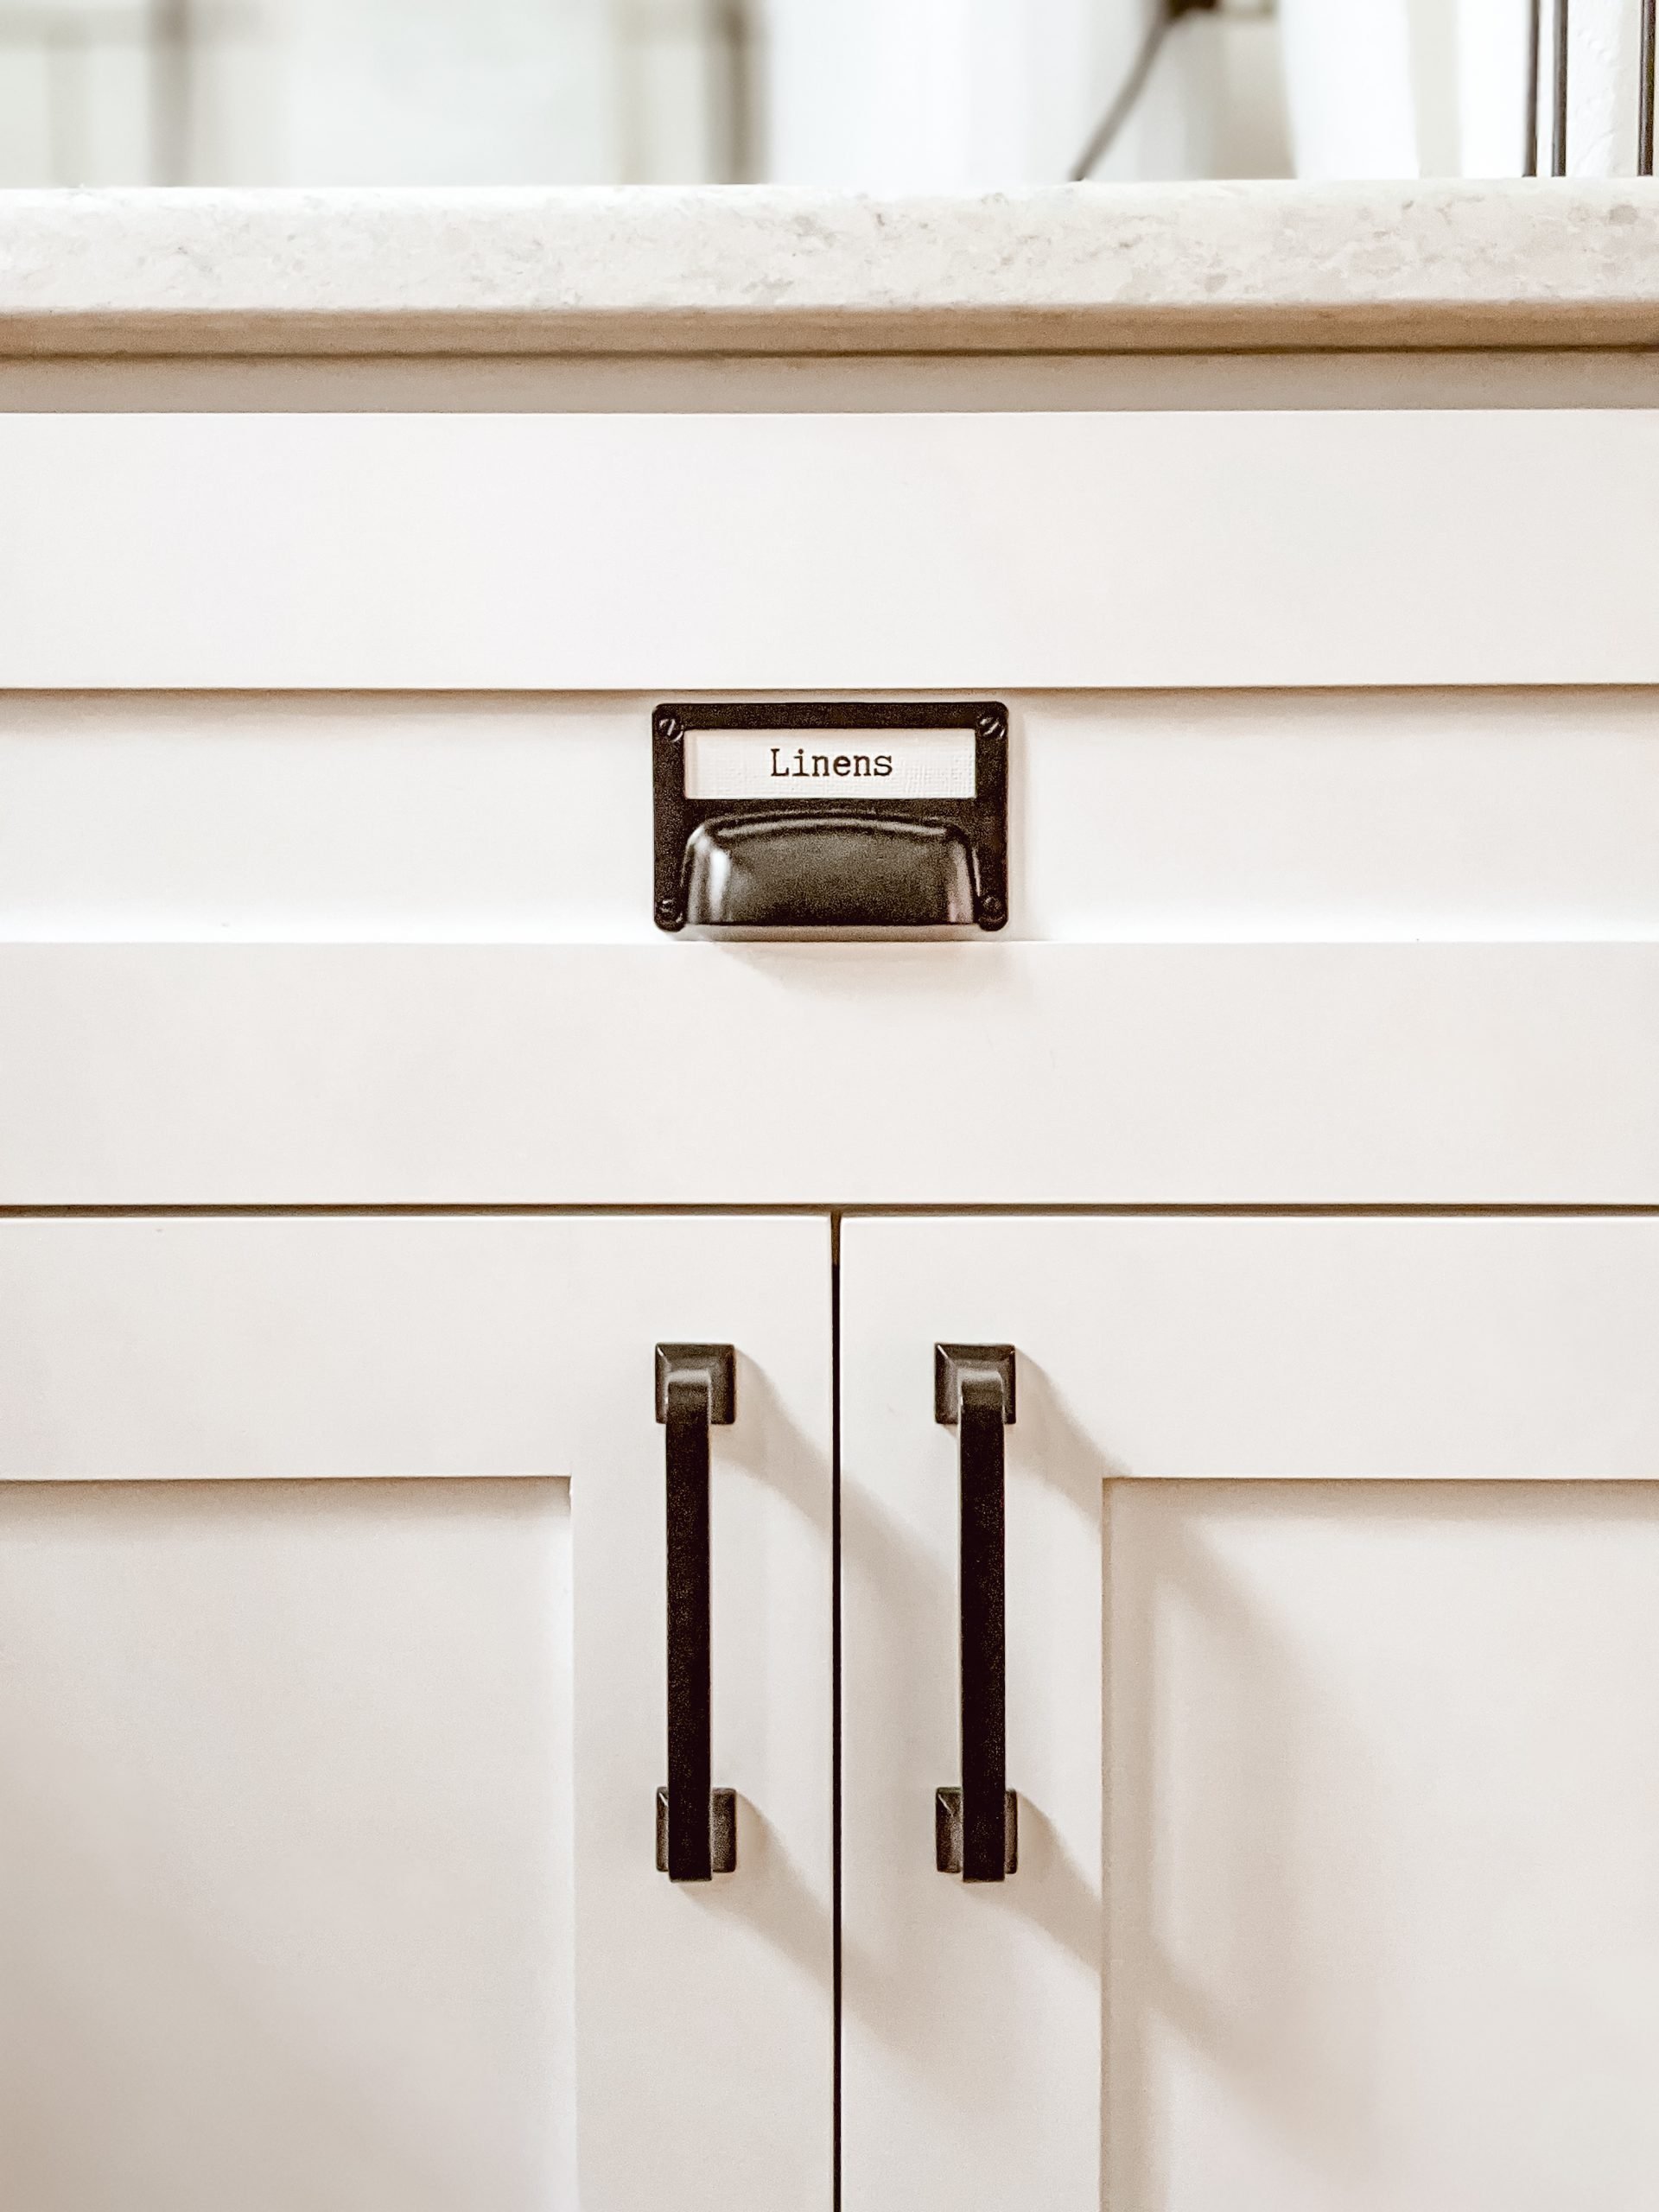 DIY Labels for Apothecary Style Drawer Pulls in the Kitchen